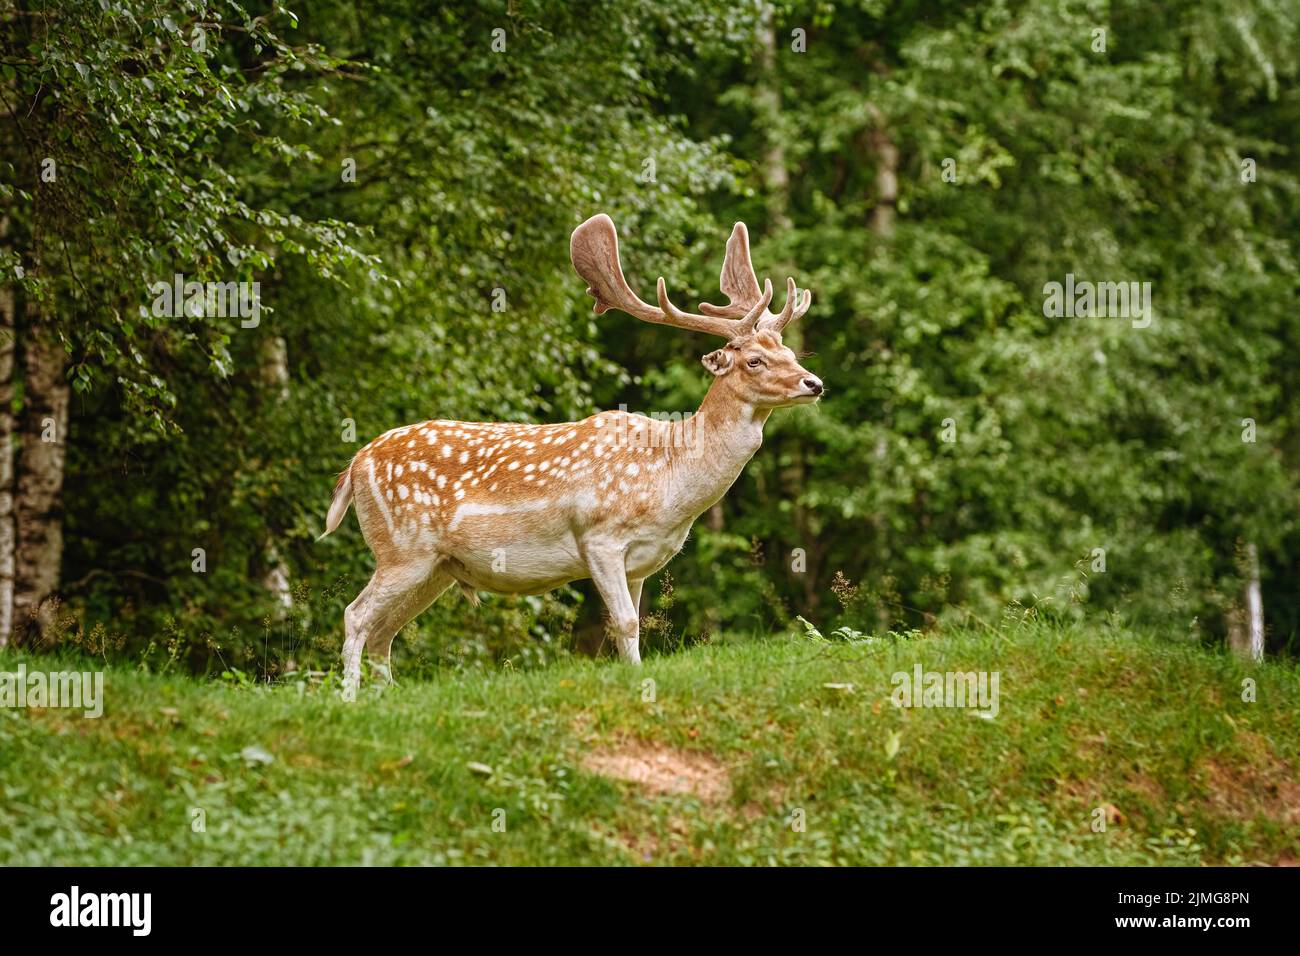 Deers with big horns near the forest Stock Photo